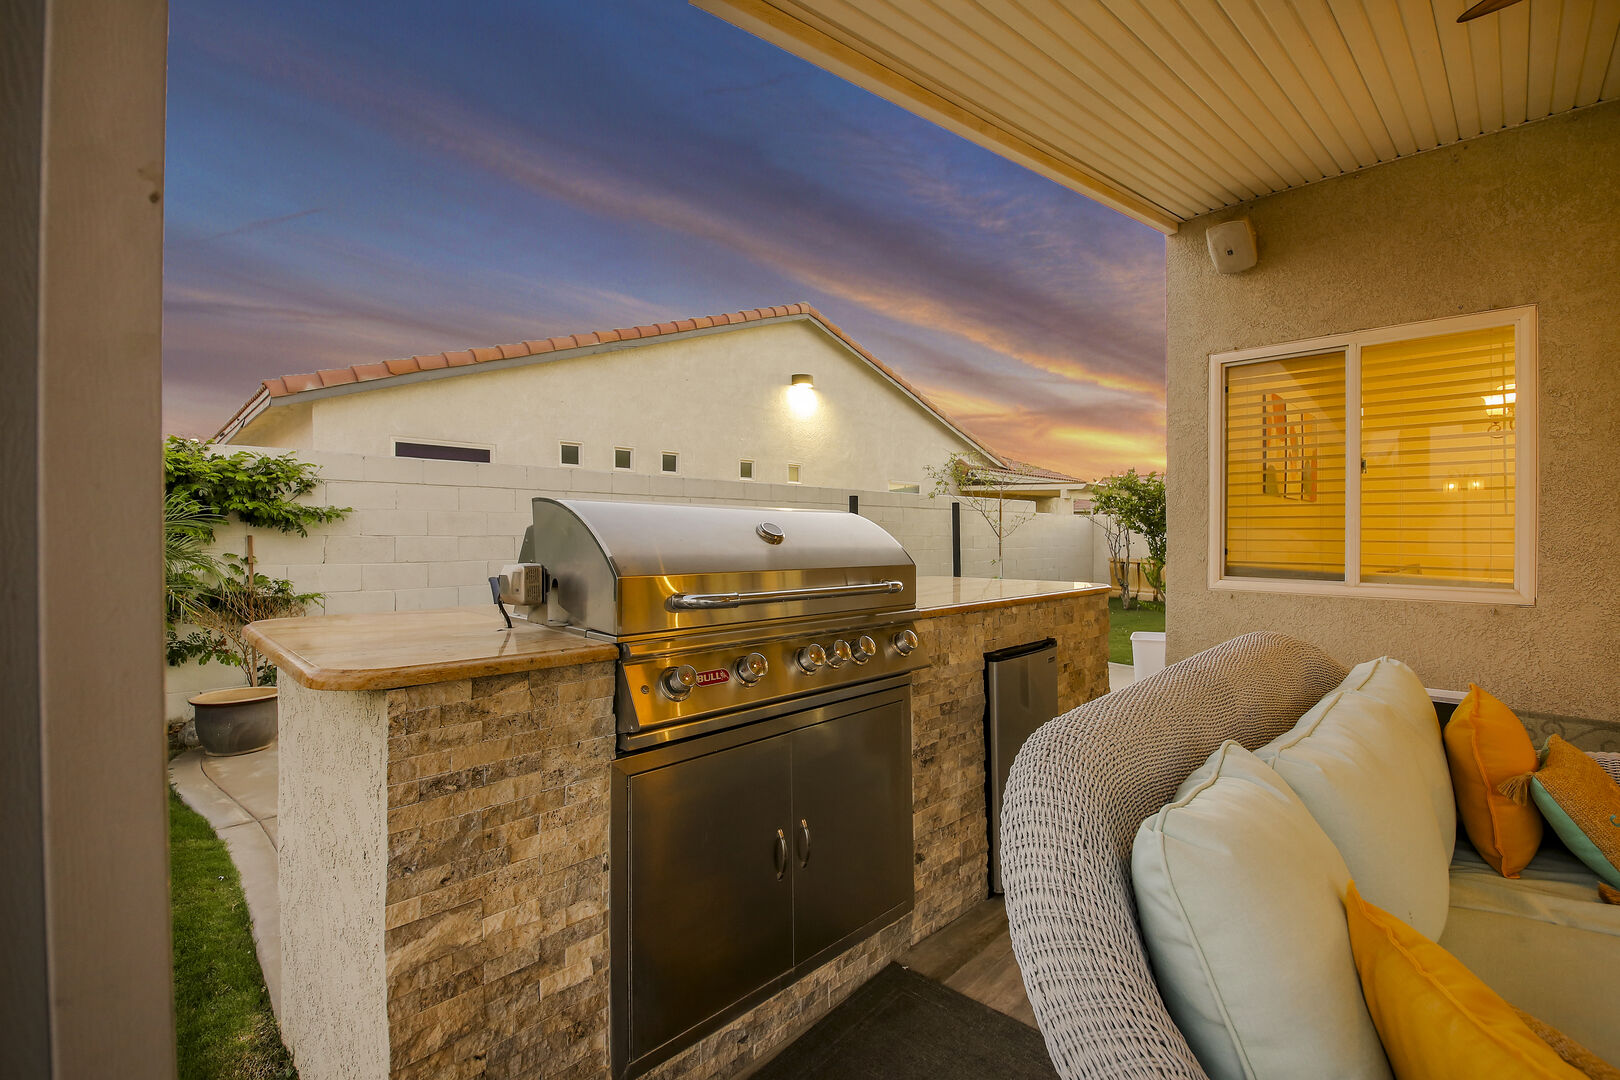 Natural gas grill means no hassle with propane tanks.